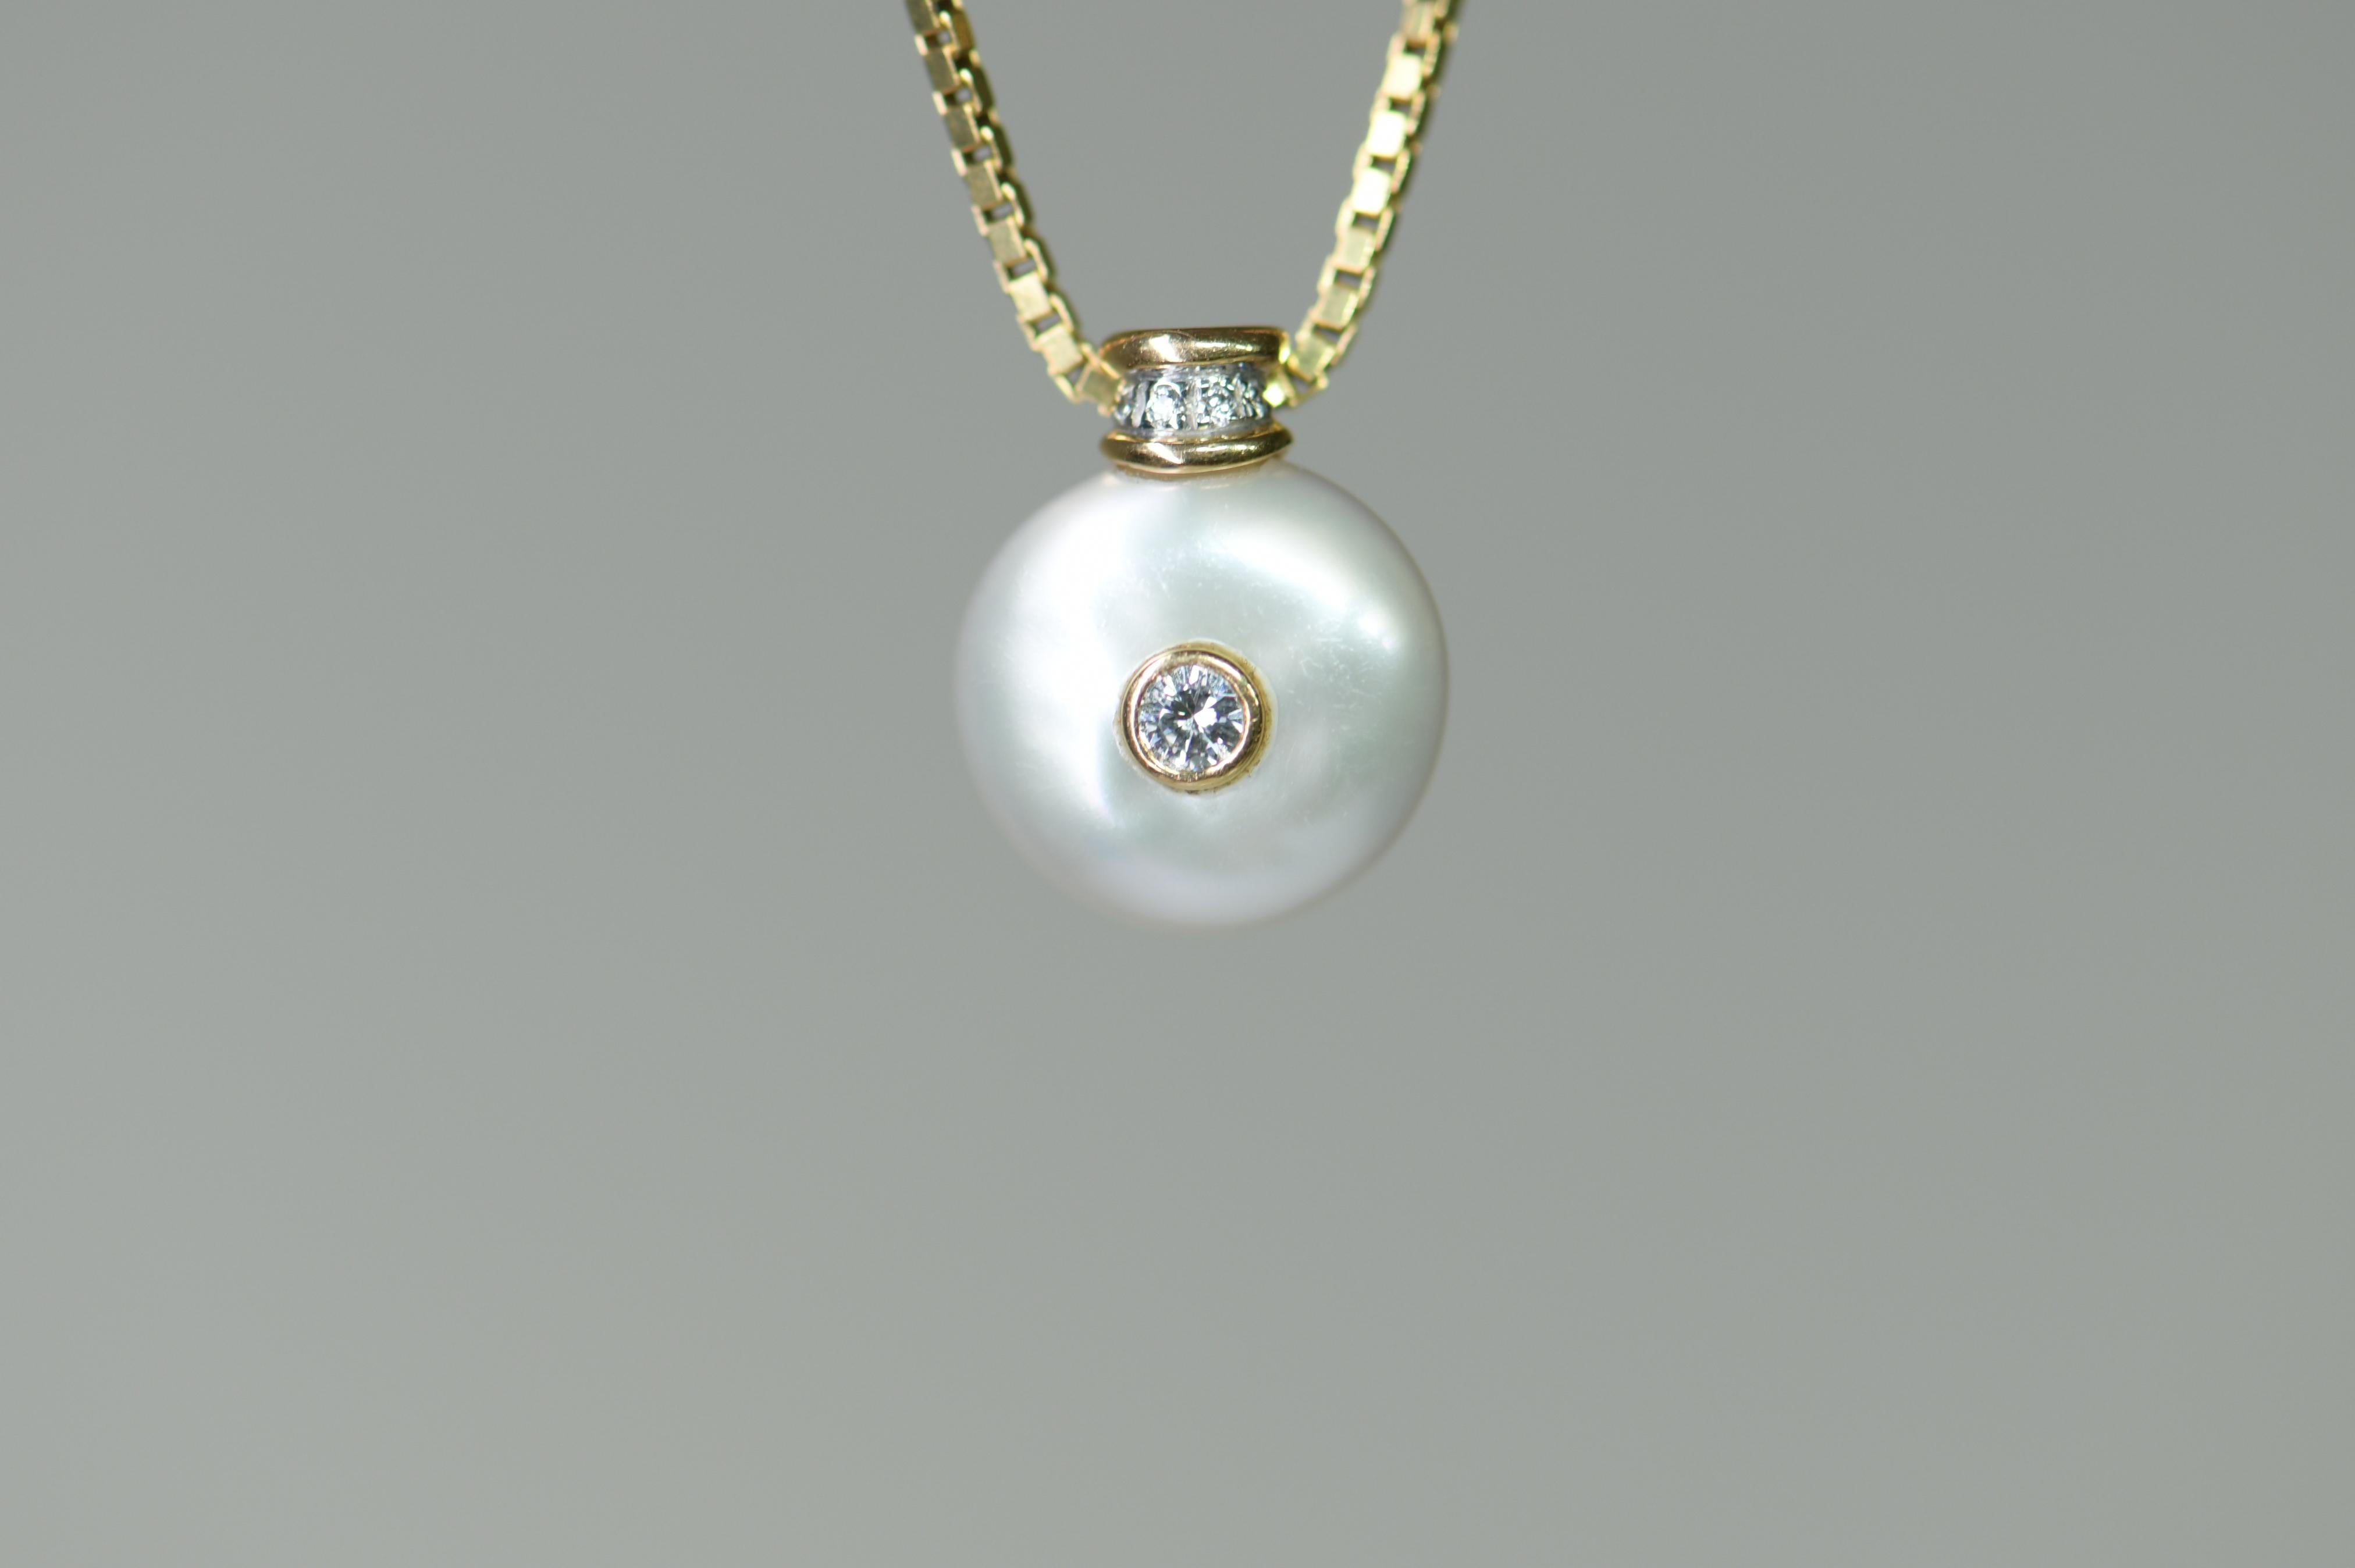 A Pearl And Diamond Pendant set with bouton pearl, collet set to the center with a small round brilliant-cut diamond, the pendant to a link chain, stamped 750.

STONES
Pearl: 12 in diameter 
Brilliant Cut Diamonds: 0.25ct

Length: